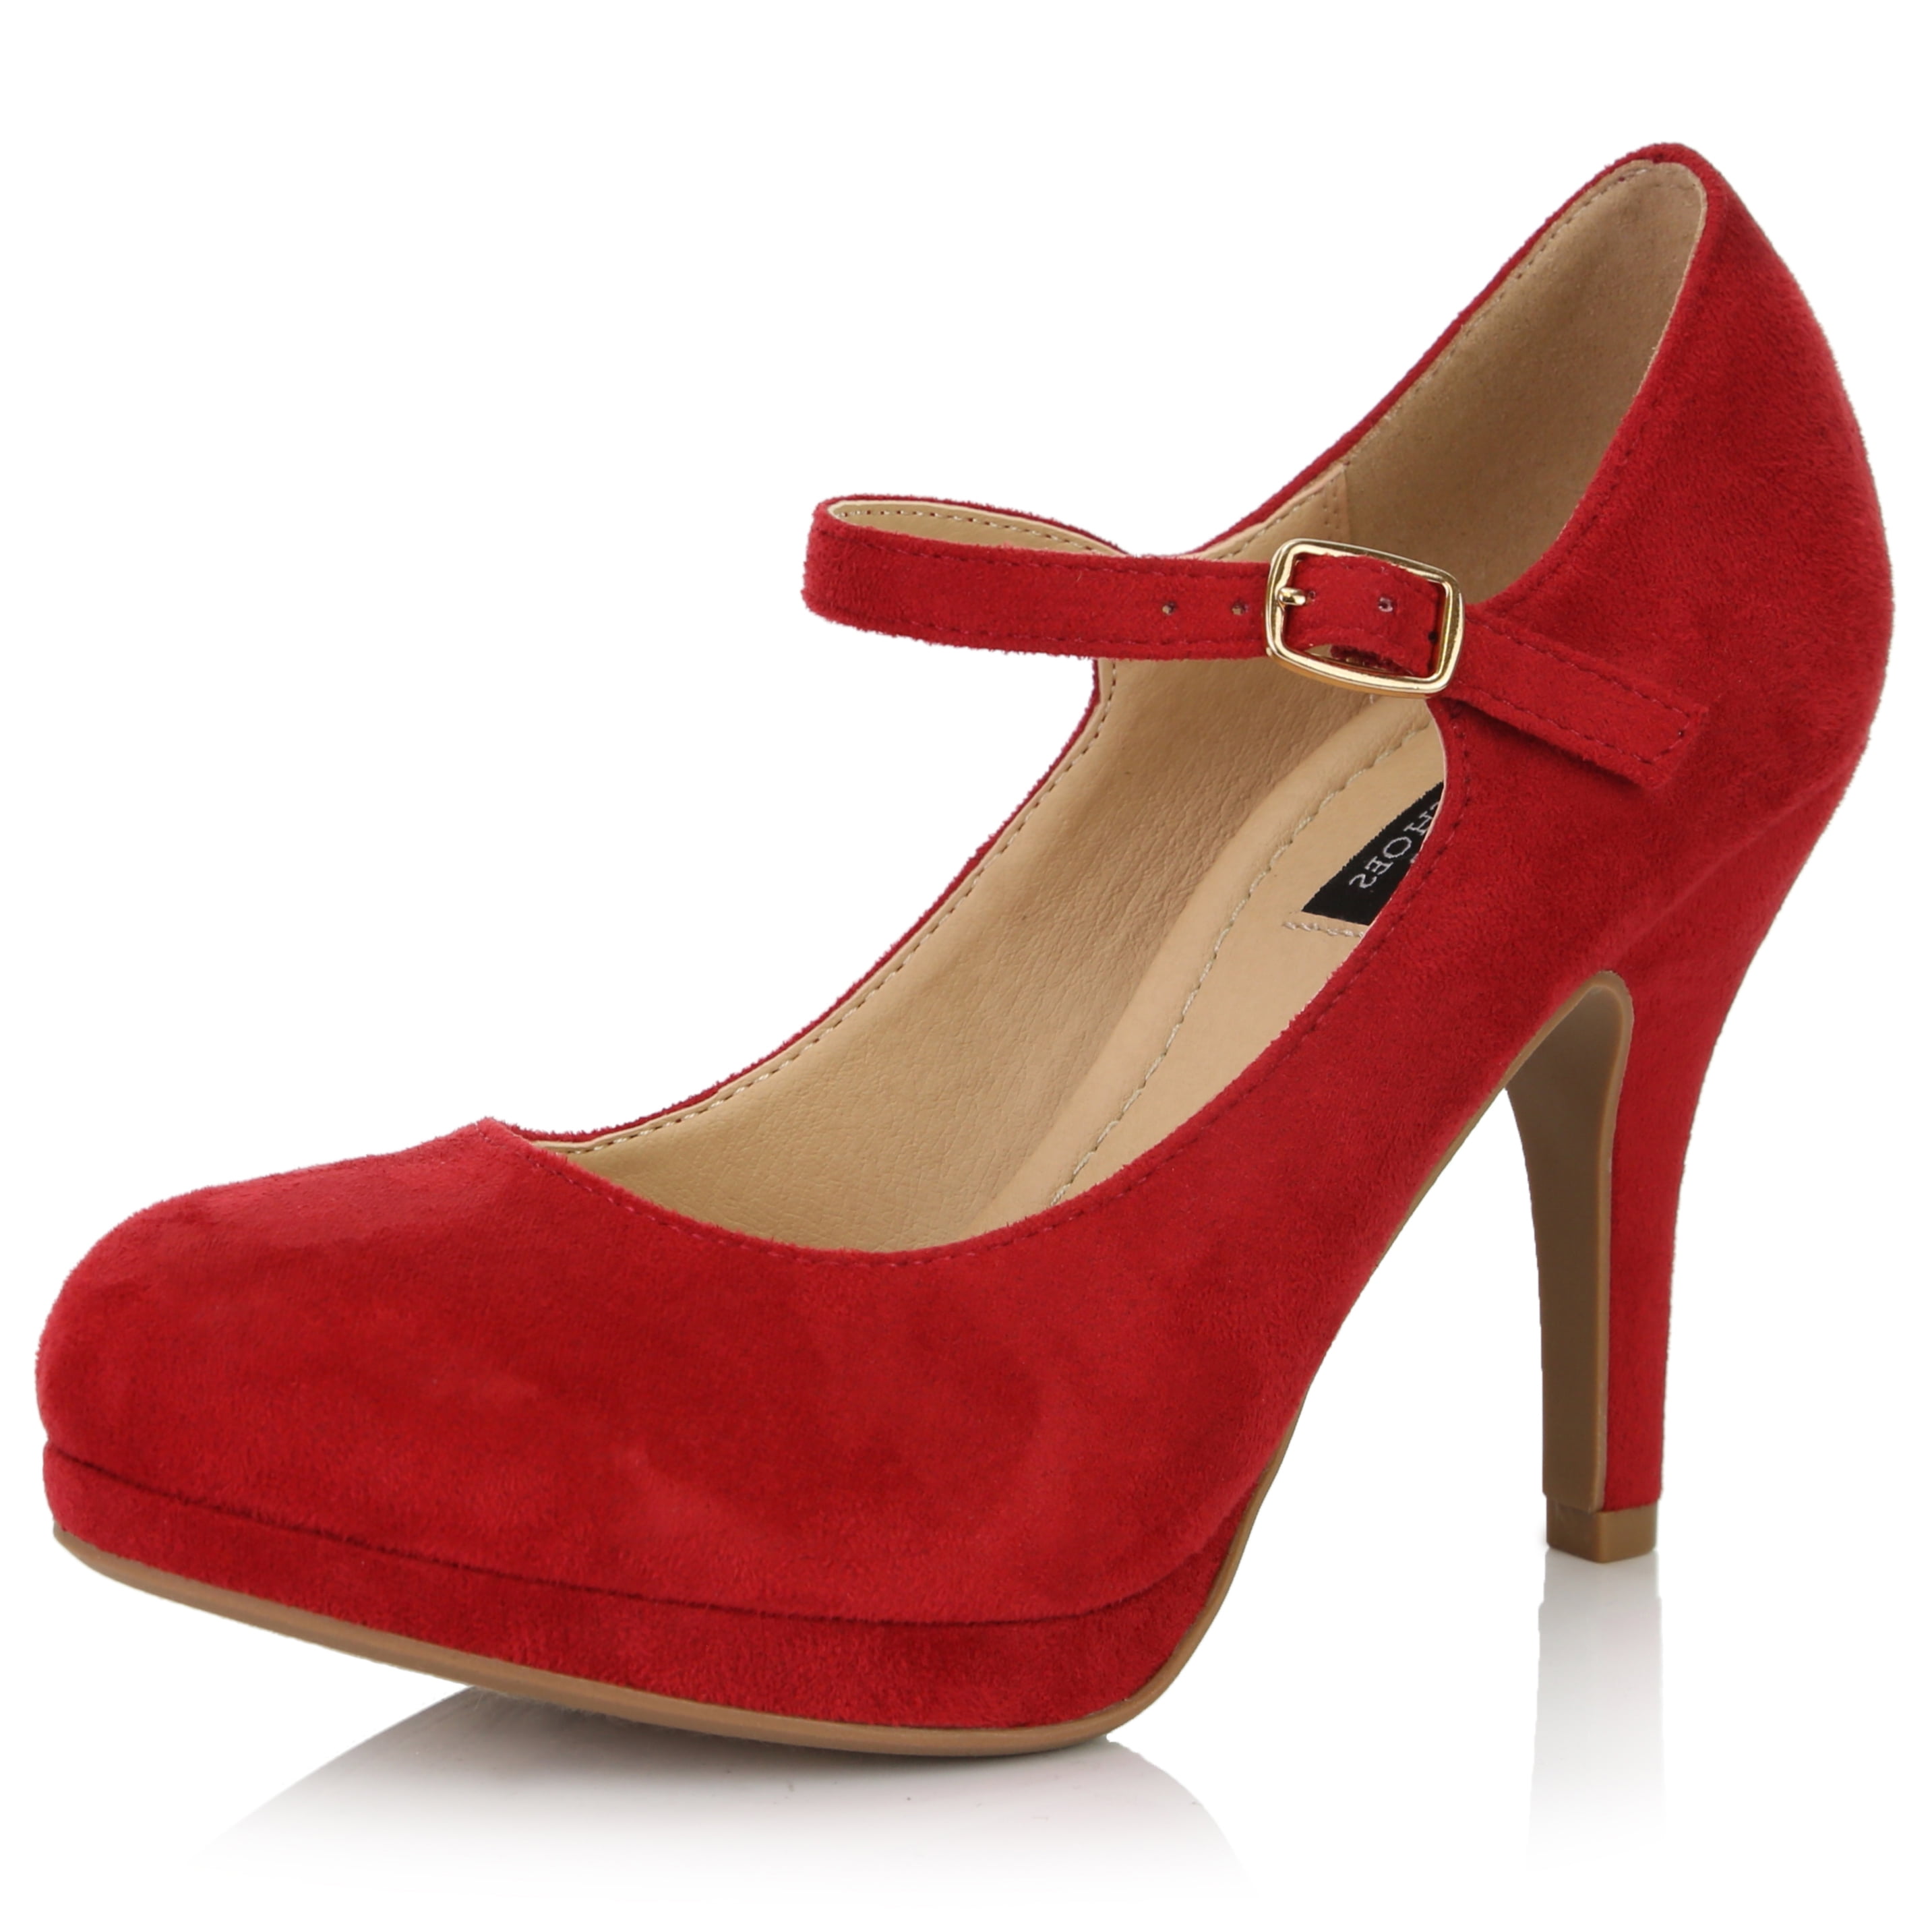 DailyShoes Women's Fashion Round Toe Buckle Strap Cushioned High Heel Shoes, Red Suede, 8 B(M) US - Walmart.com